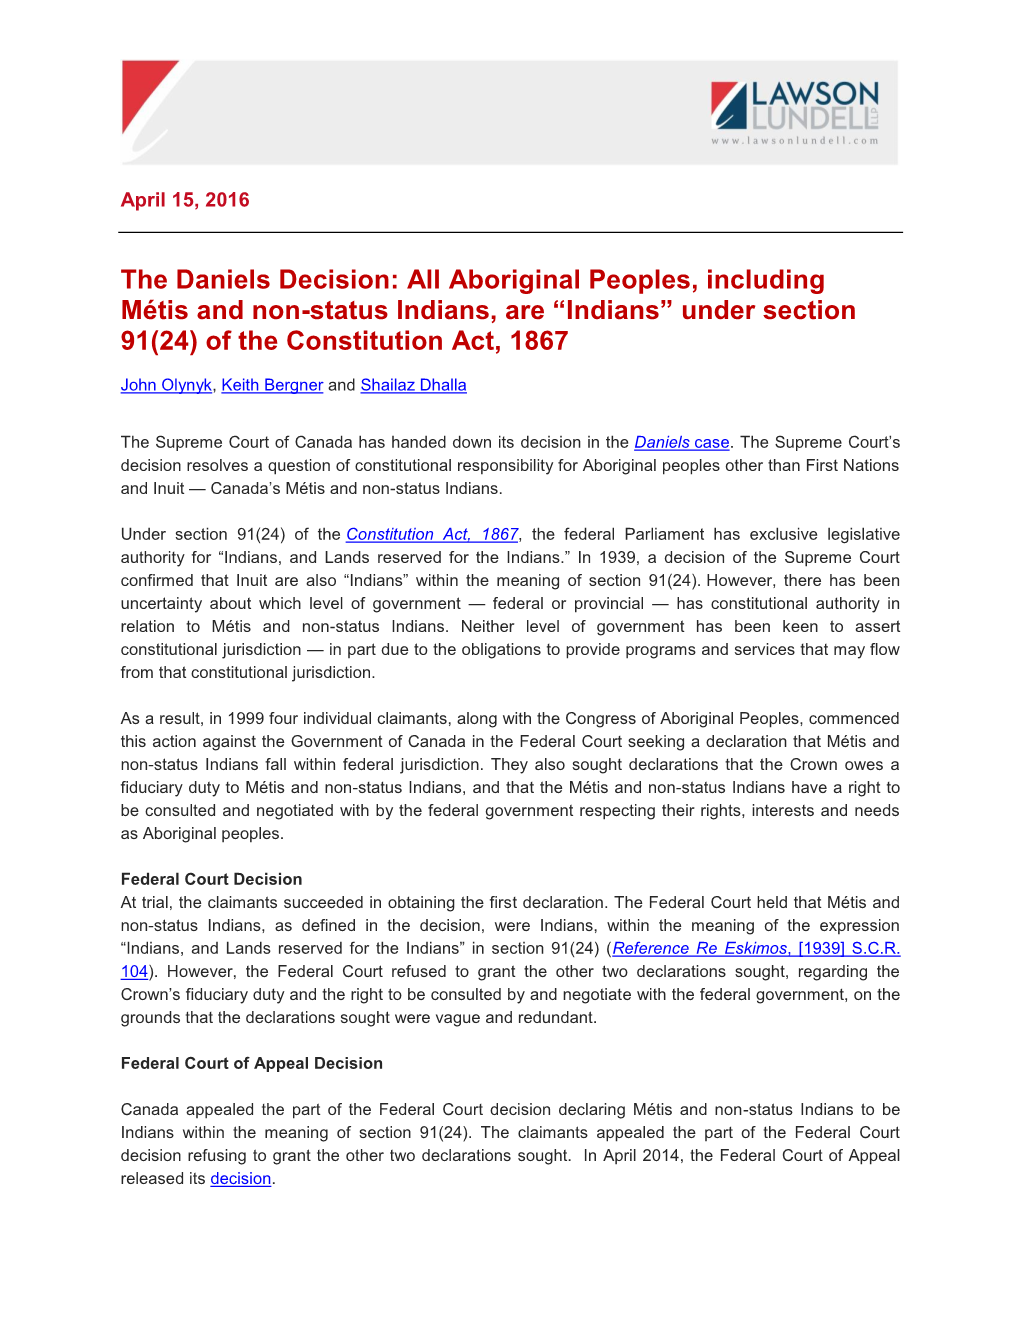 The Daniels Decision: All Aboriginal Peoples, Including Métis and Non-Status Indians, Are “Indians” Under Section 91(24) of the Constitution Act, 1867